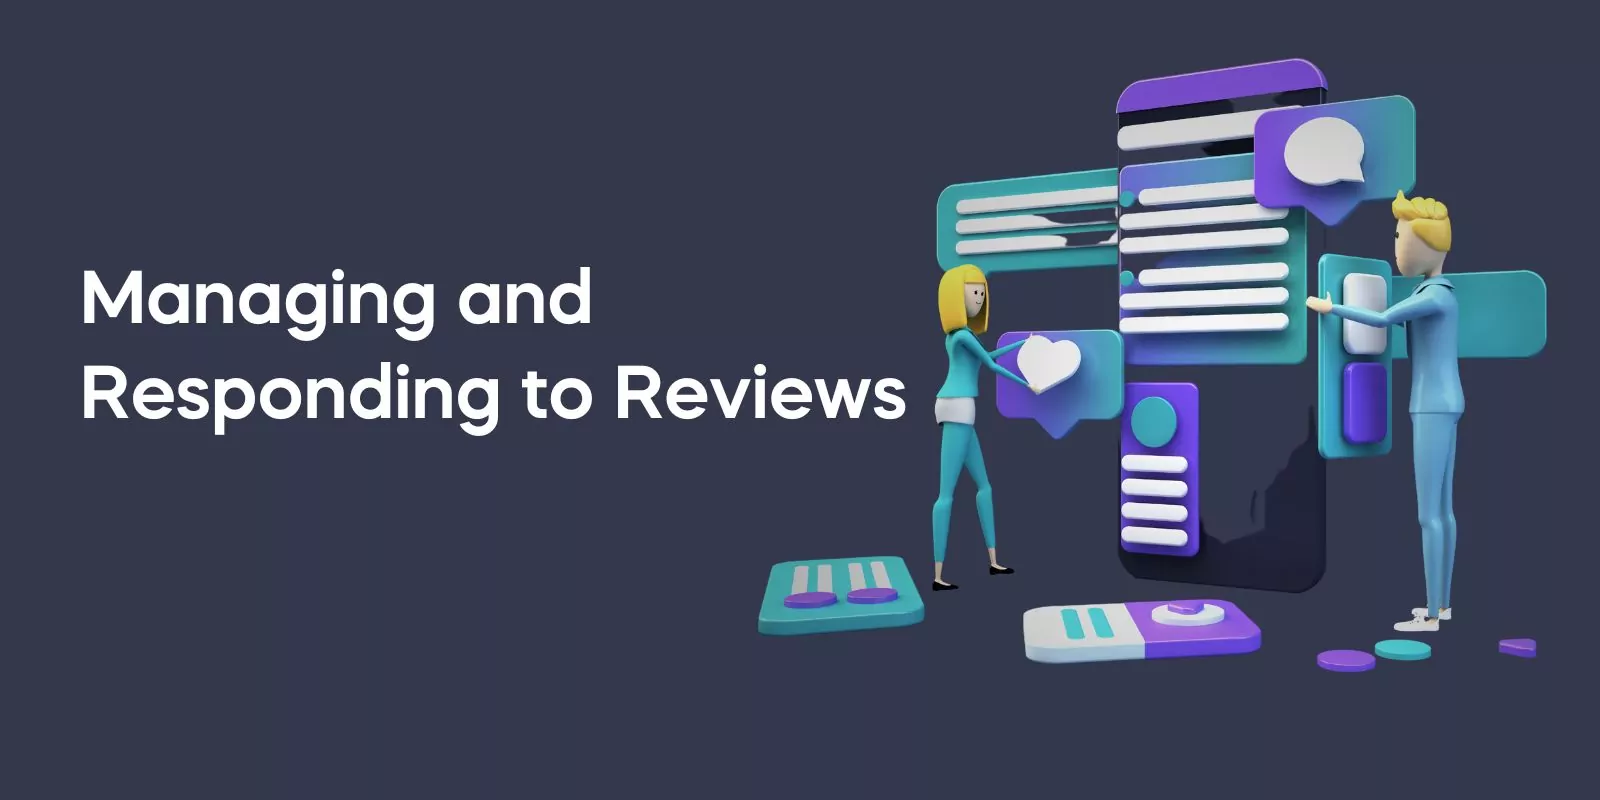 Managing and Responding to Reviews